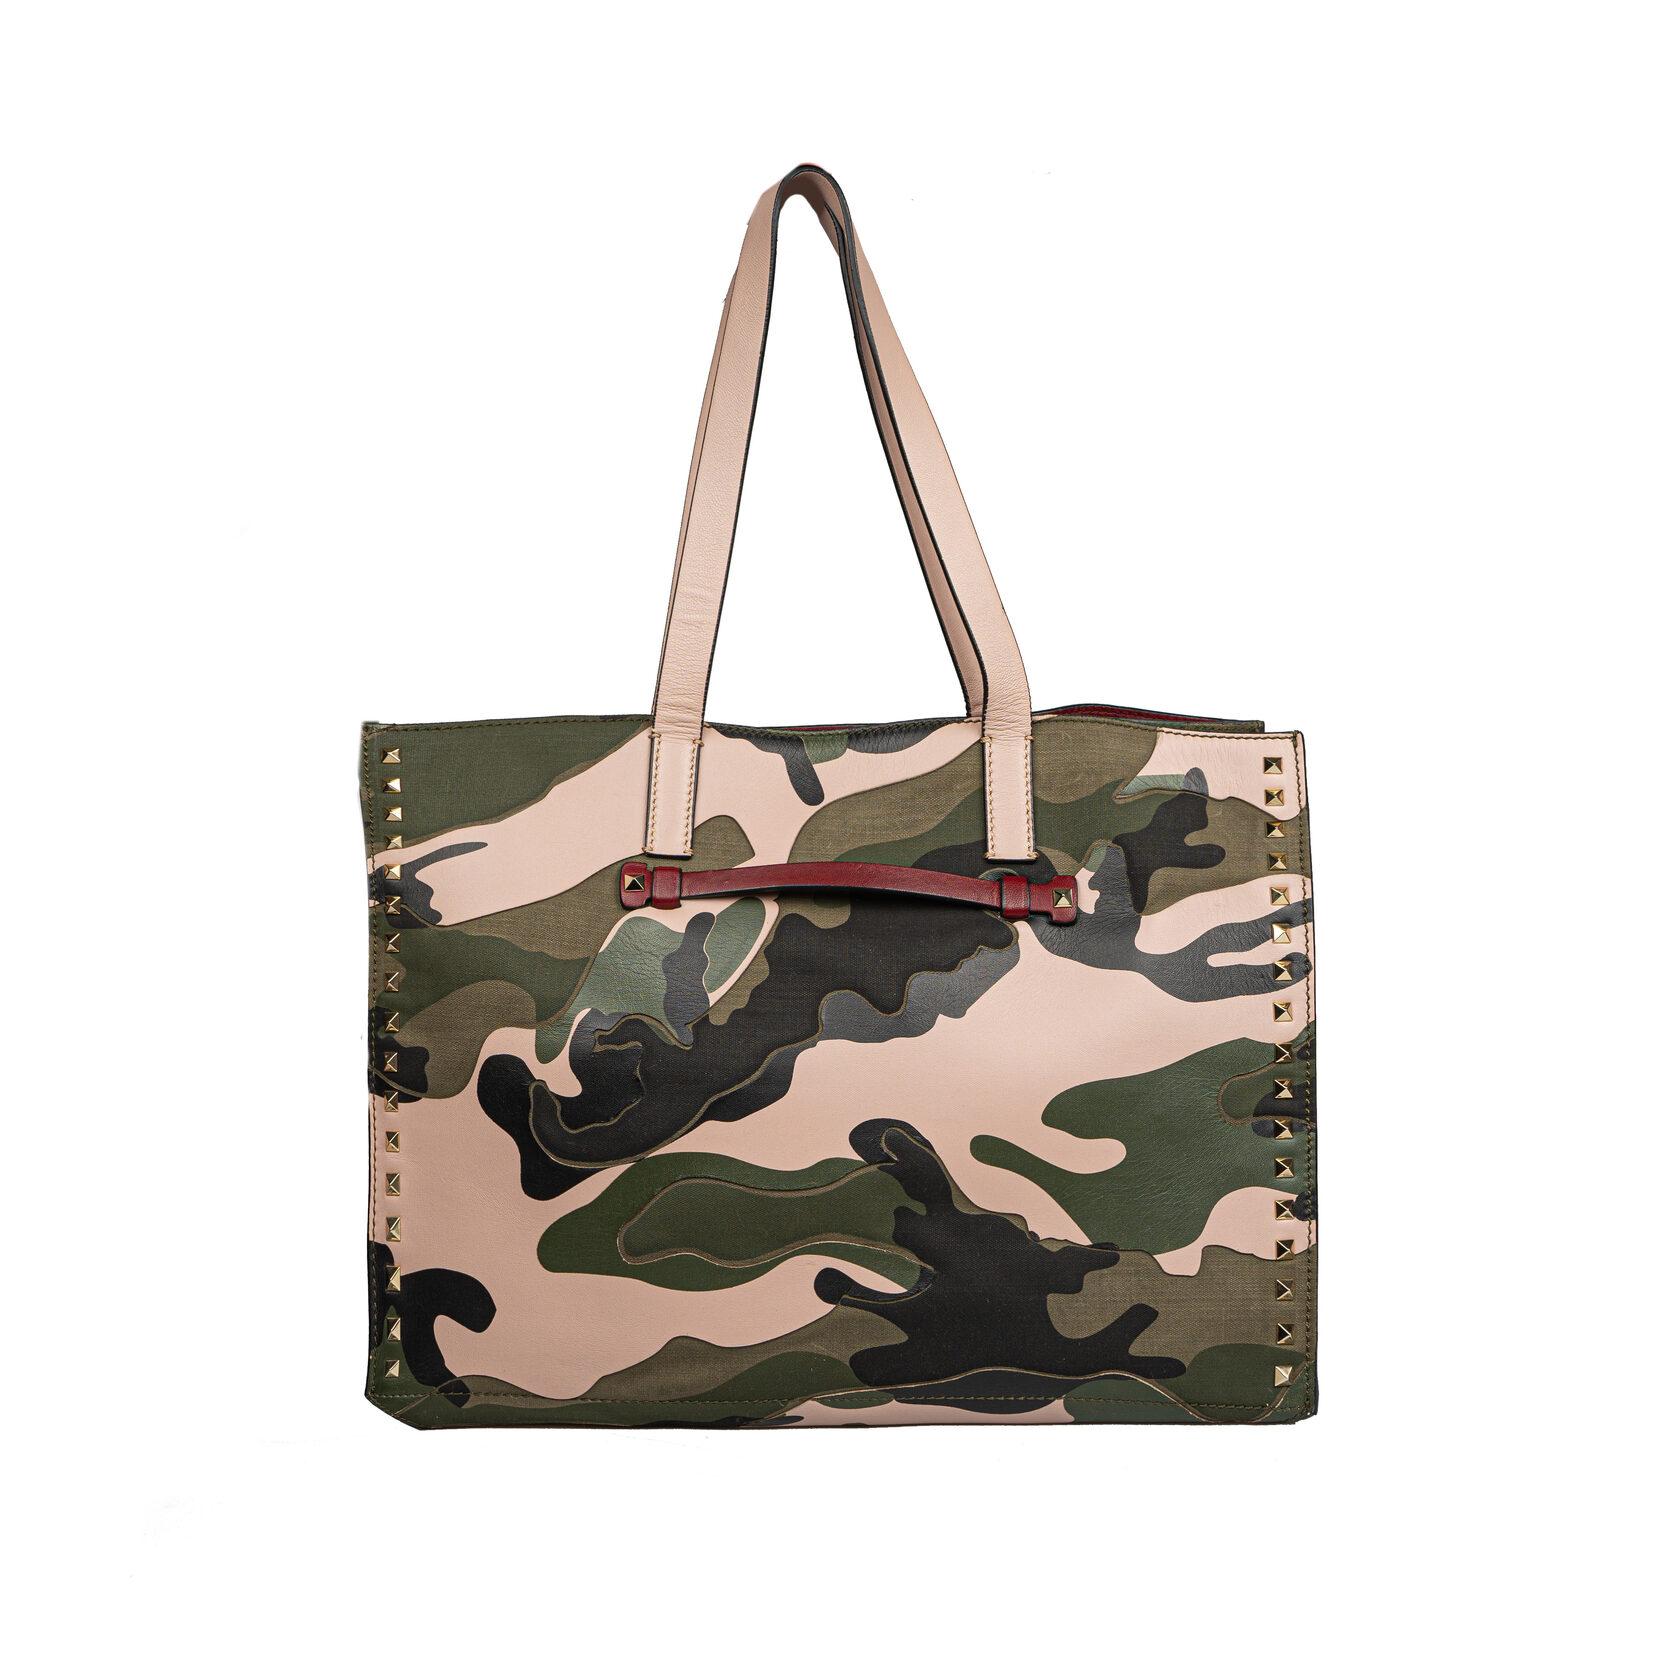 CONDITION: A: Excellent condition with few signs of use; carefully kept.
SIZE: 39/28/15 cm; Handles 51 cm.
BRAND: VALENTINO GARAVANI
MODEL: Rockstud Camouflage Tote
COLOUR: Green / Khaki / Pink (Military)
Leather material
INSIDE COLOUR: